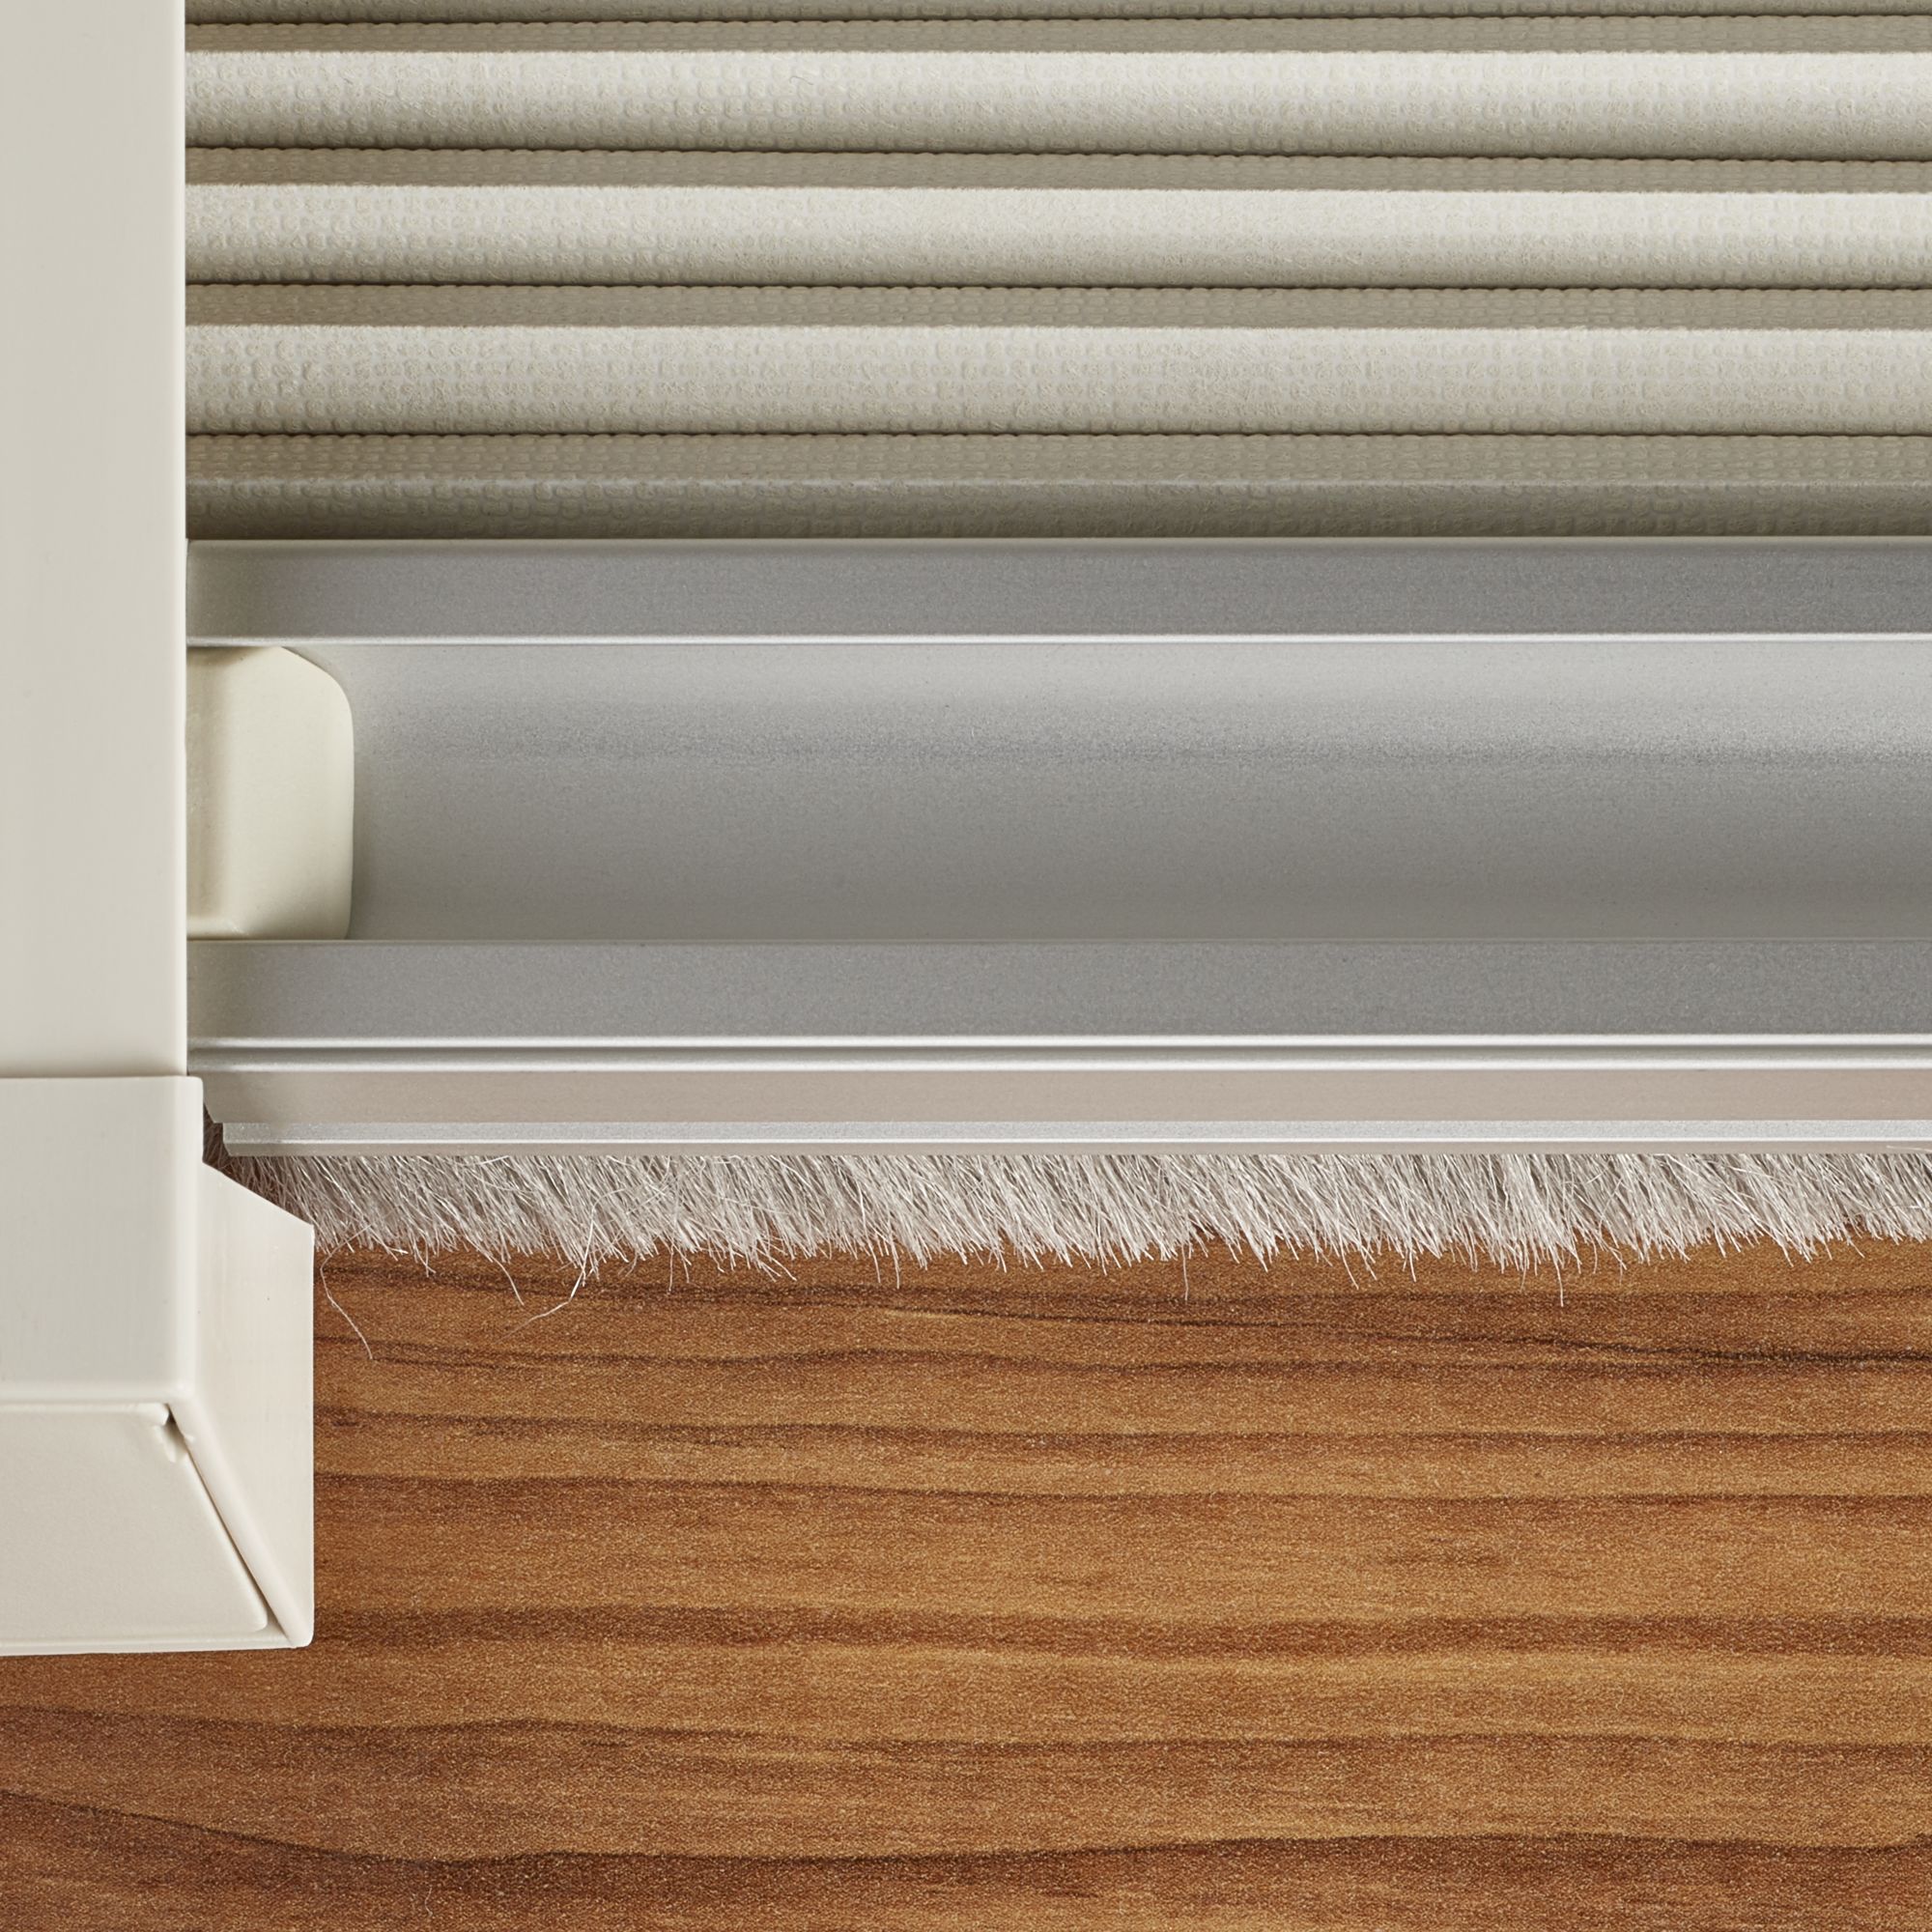 Dometic DB3H Roller Blind double-pleated, 1485 x 800 mm, creme-white